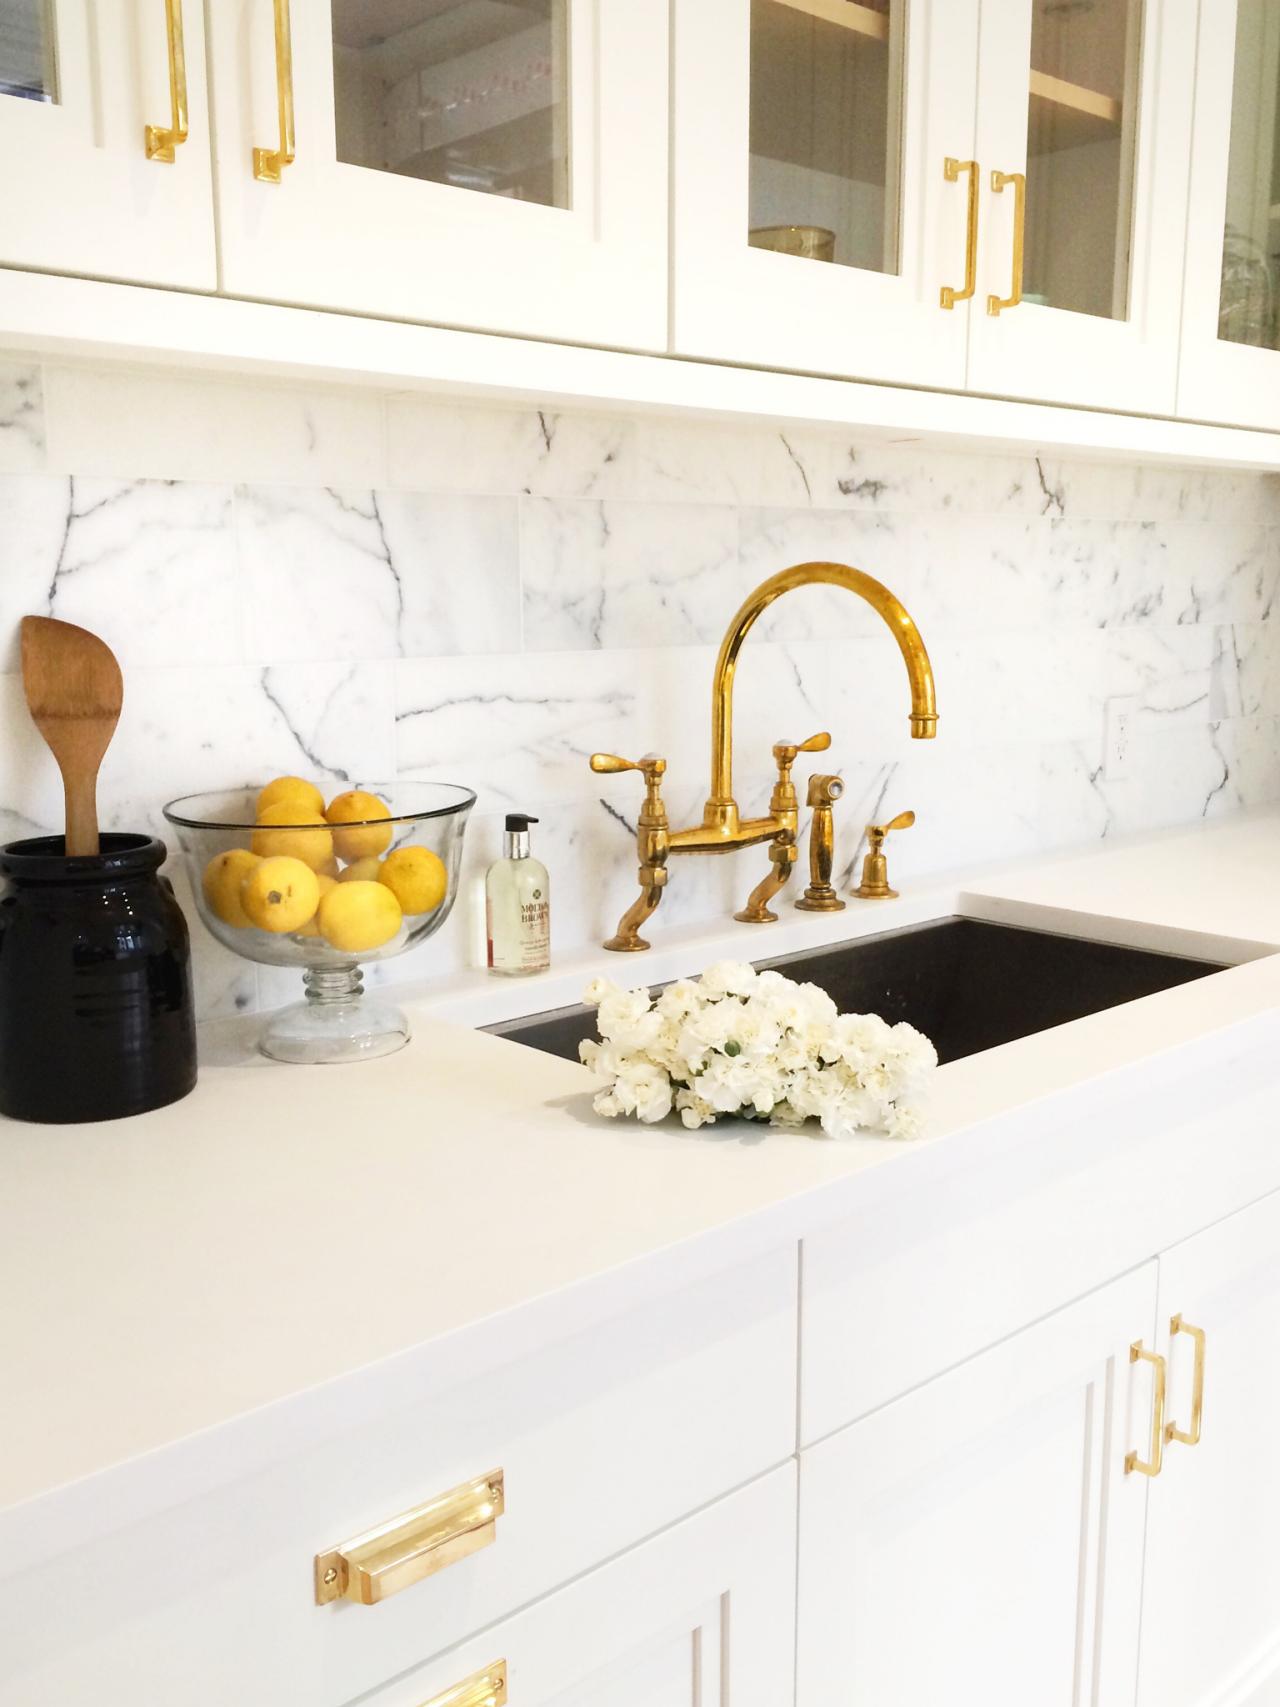 Ideas For Styling Your Kitchen Counters   HGTV's Decorating ...